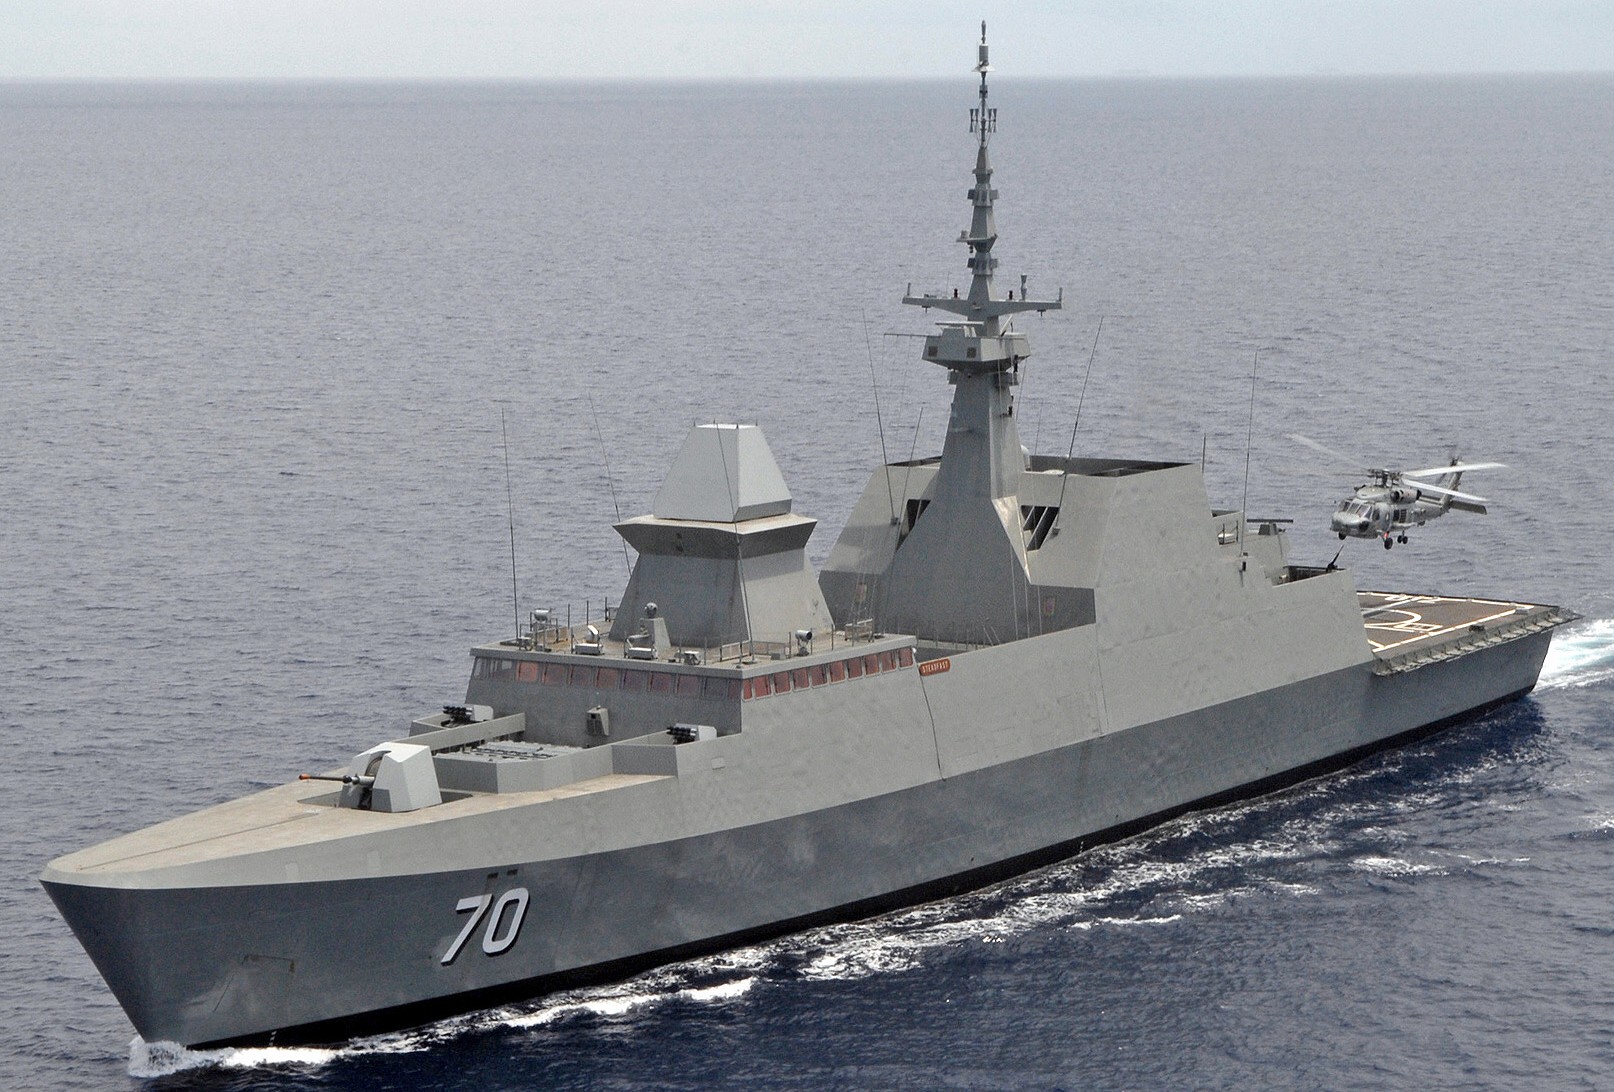 70 rss steadfast formidable class multi-mission missile frigate ffg republic singapore navy 10